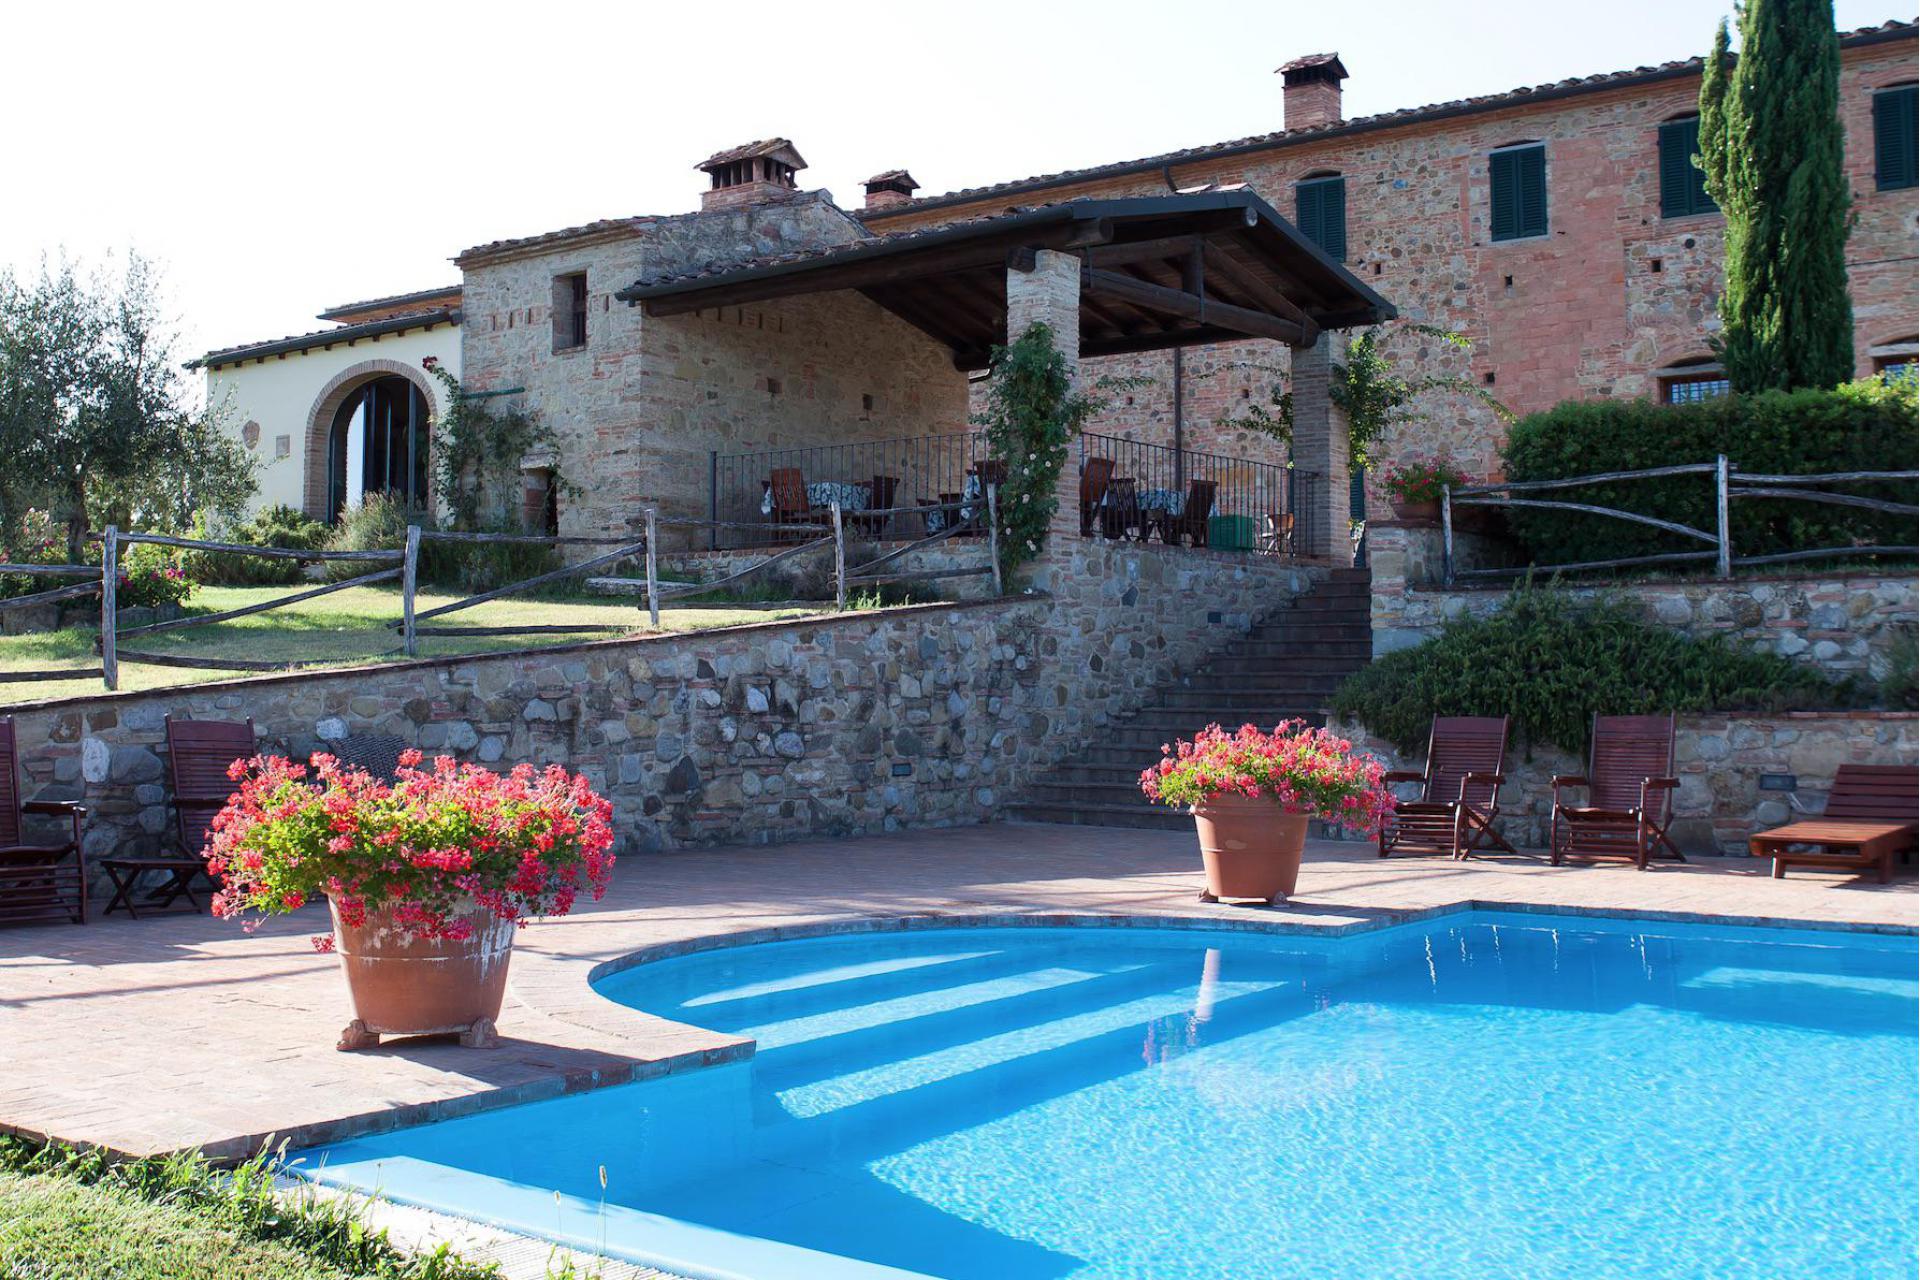 3. Family-friendly agriturismo with pizza night